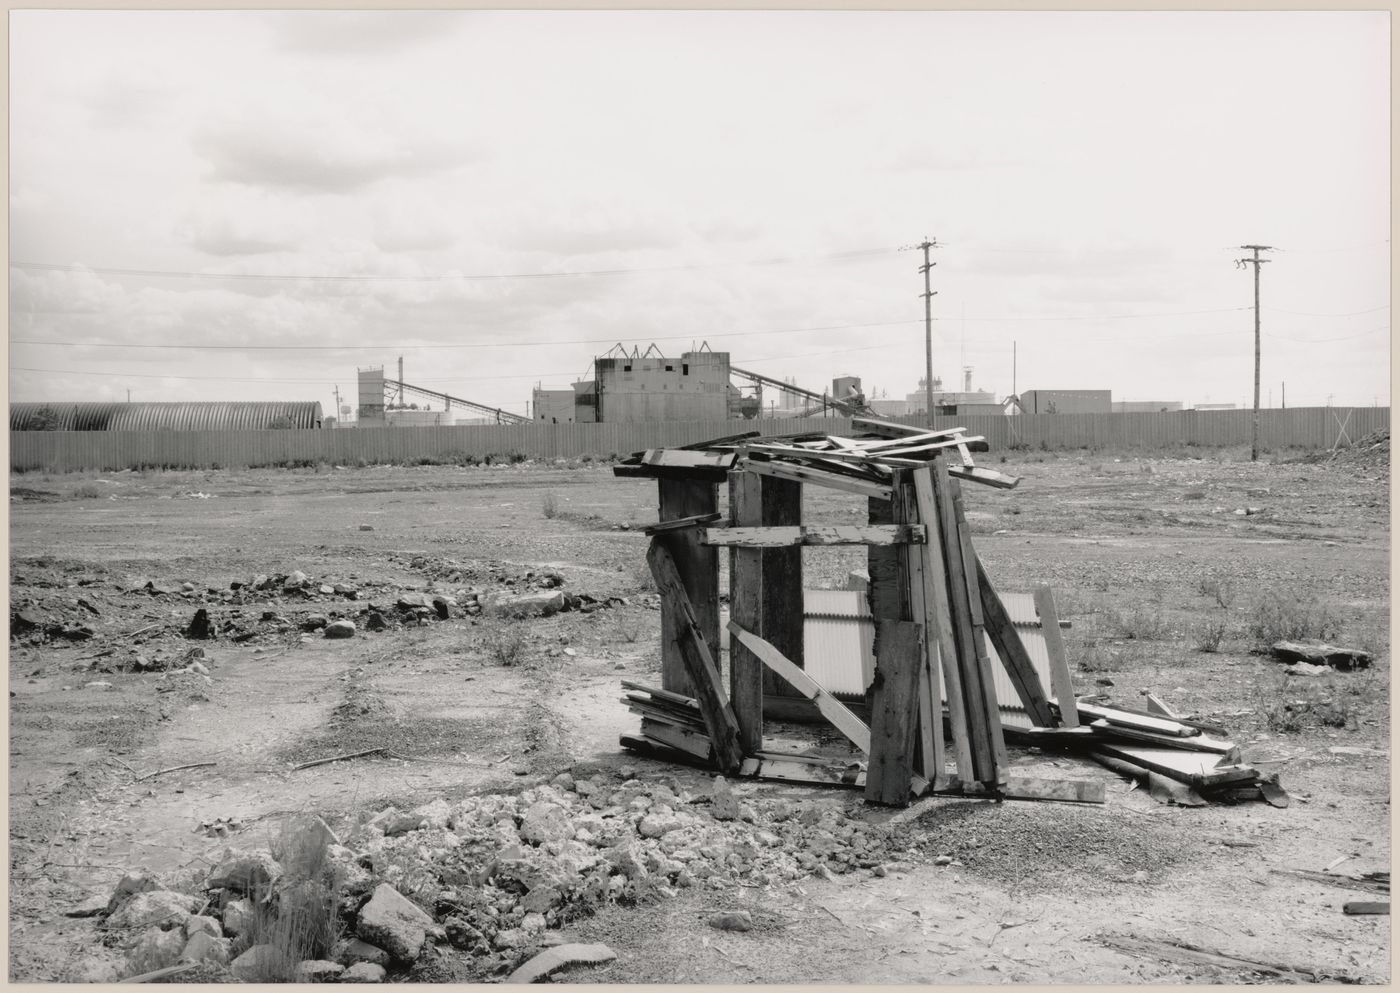 Field Work in Montreal: View of a shack-like structure of wood and corrugated fibreglass, a vacant lot and utility poles showing a metal fence and a processing plant in the background, Montréal, Québec